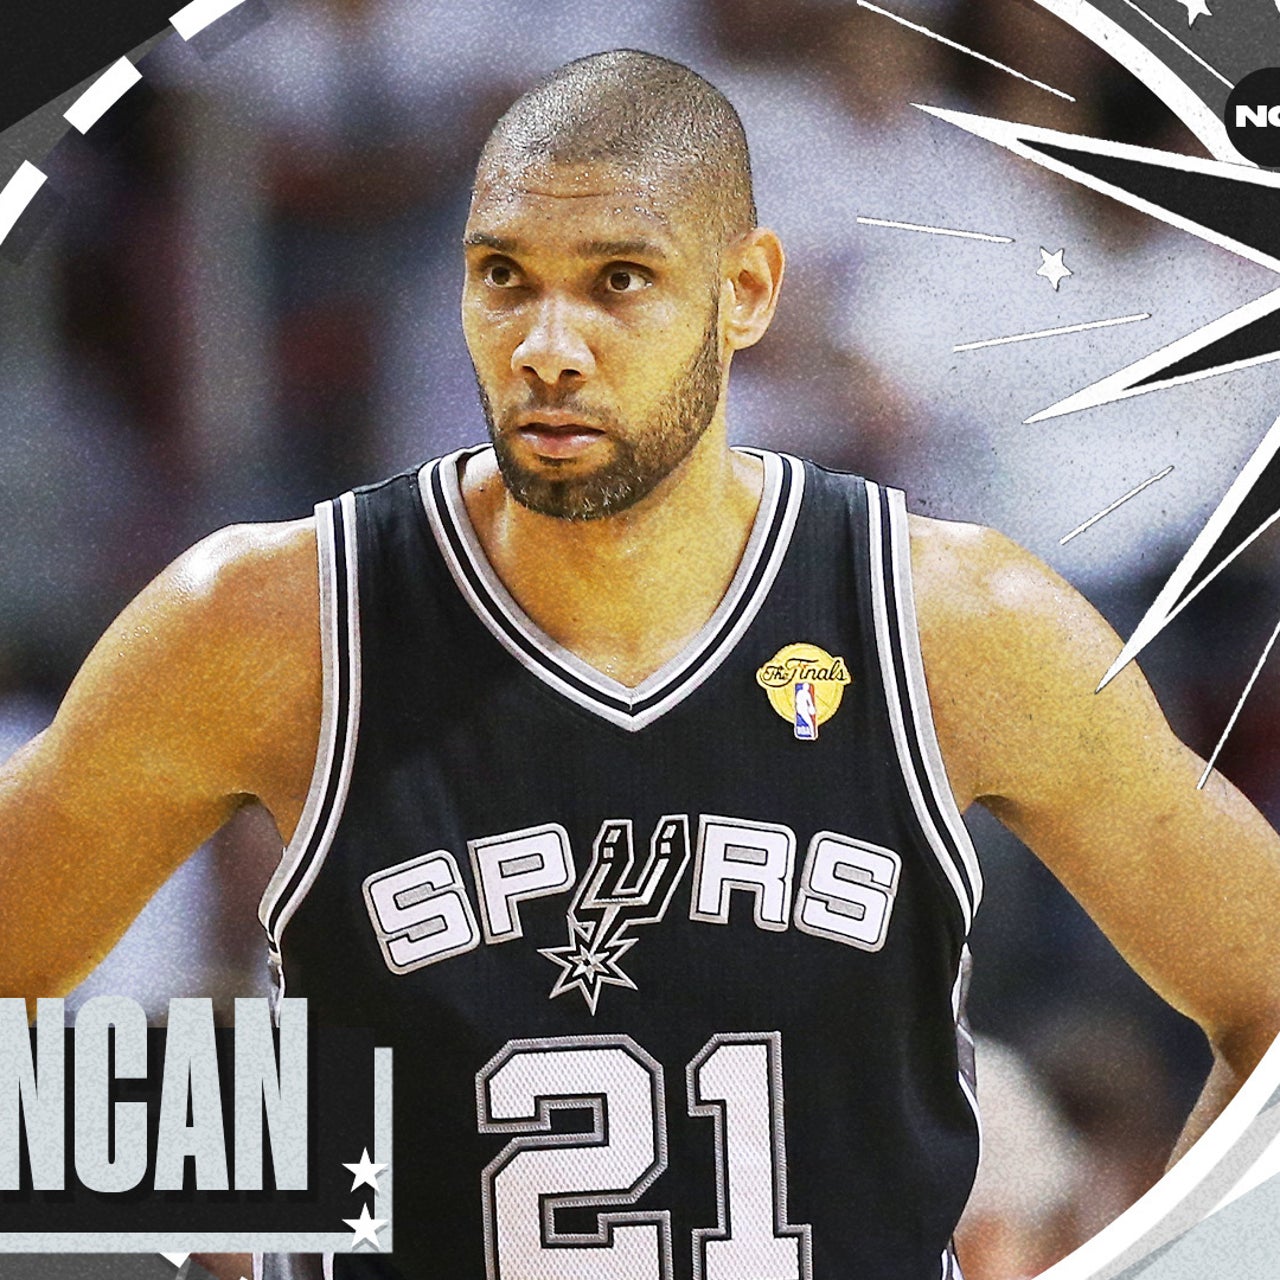 NBA: Tim Duncan led the San Antonio Spurs to another overtime win